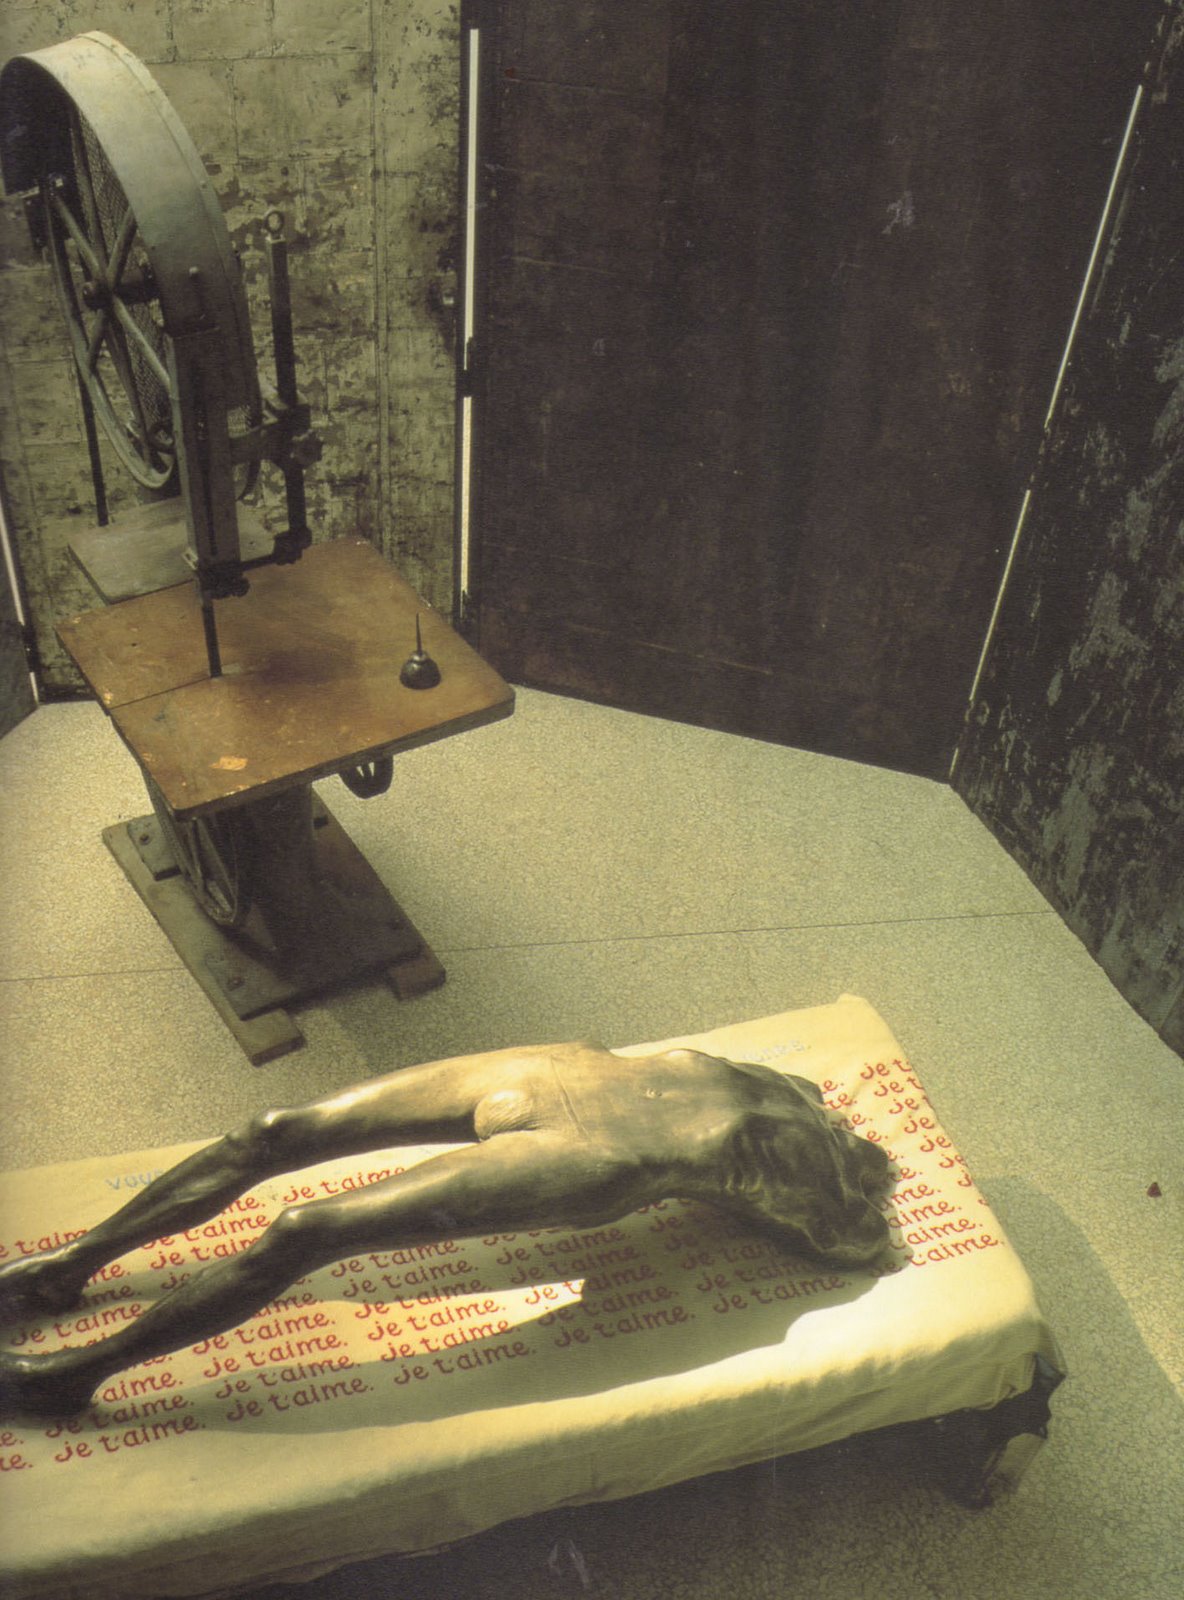 [louise+bourgeois+arch+of+hysteria+1992.jpg]